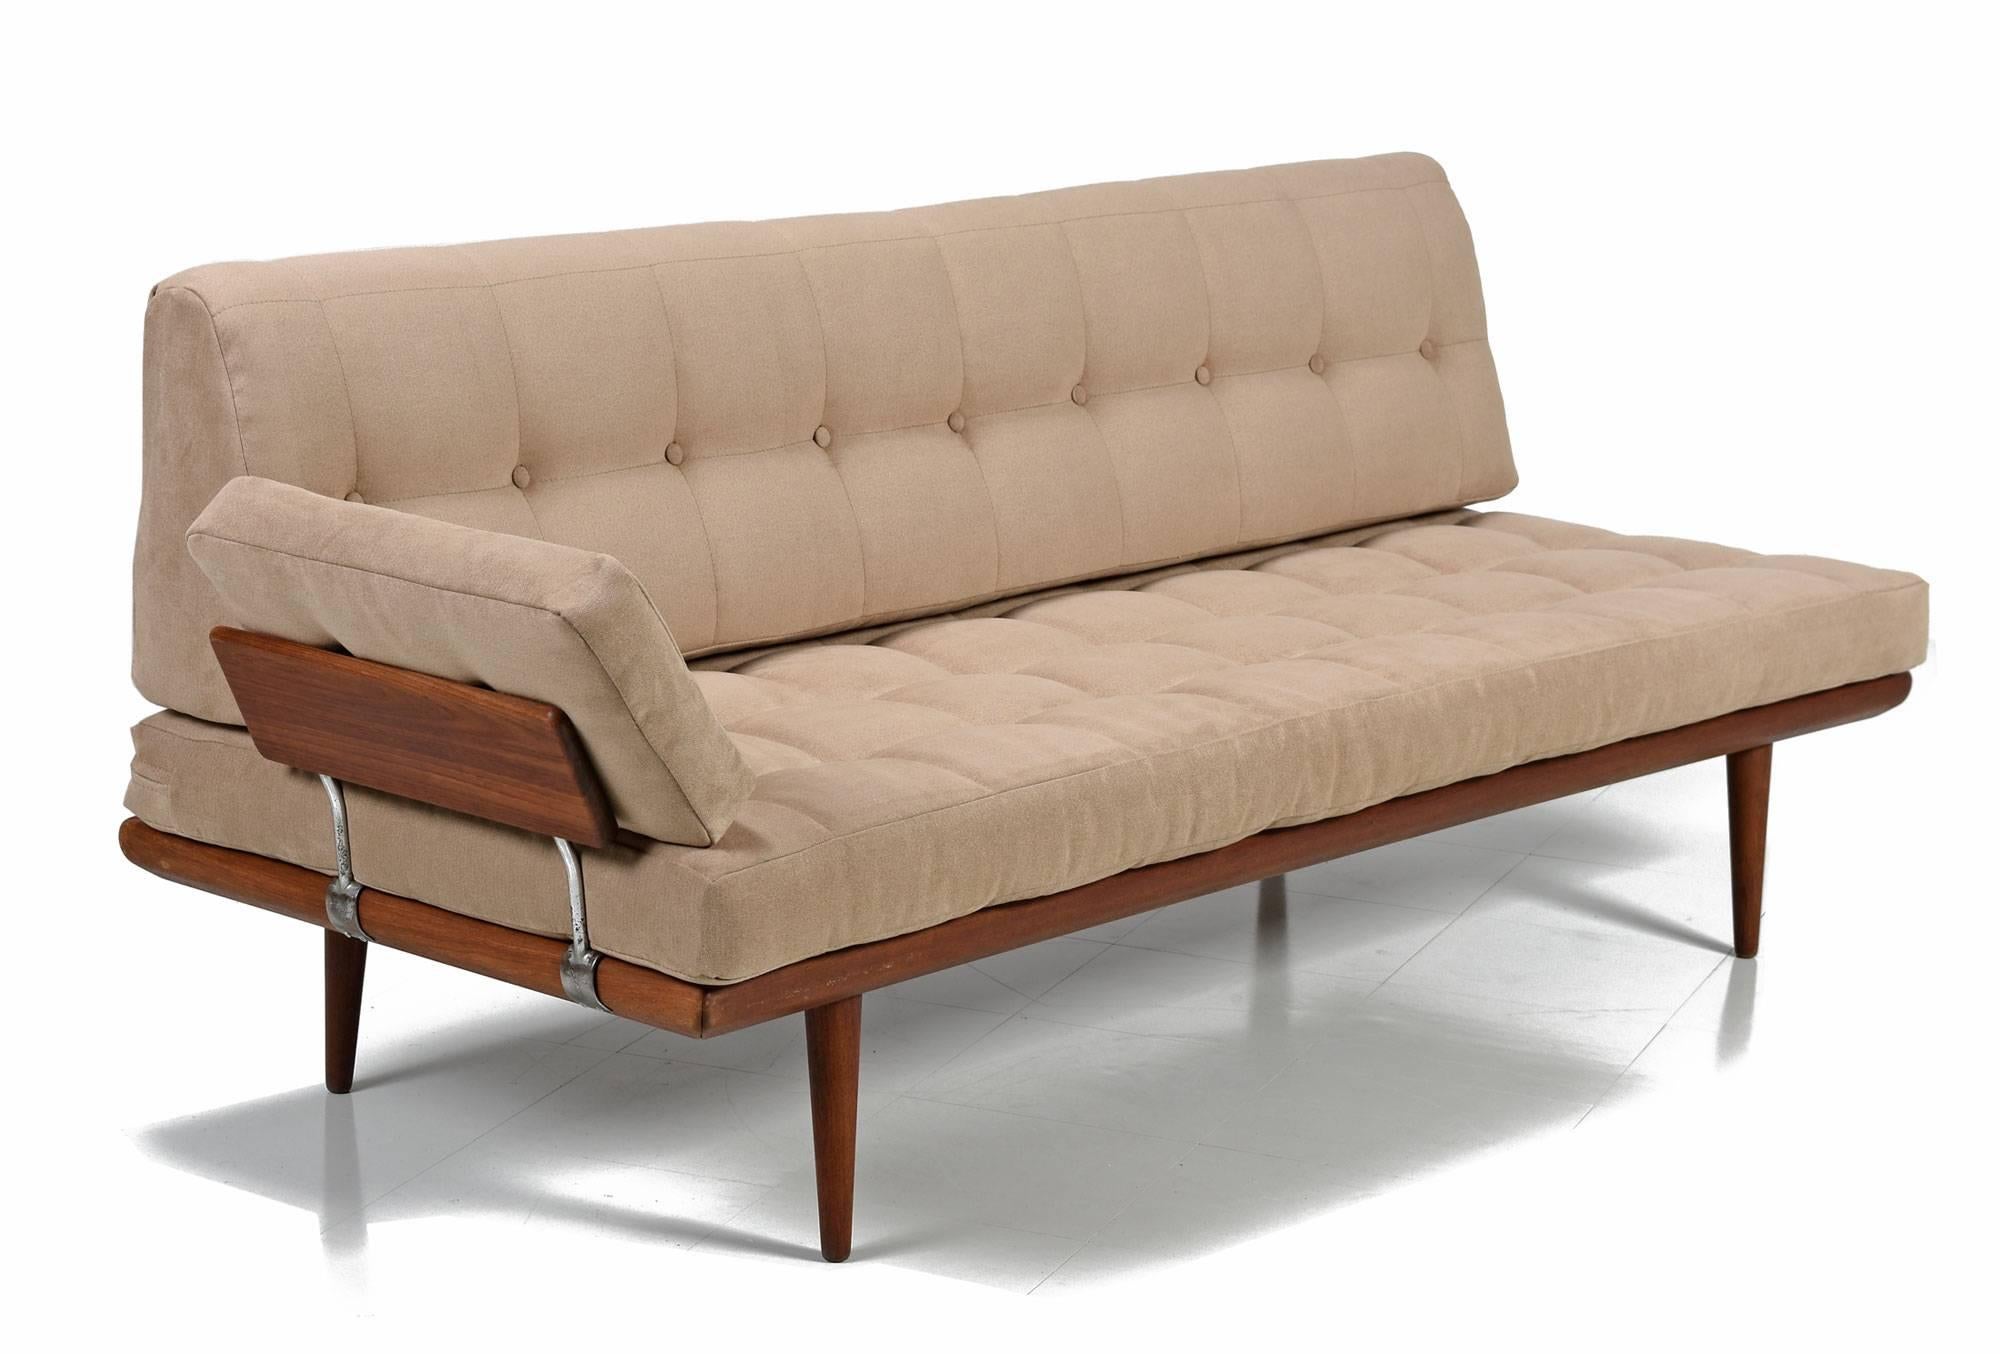 Handsomely restored Mid-Century Modern Minerva lounge sofas set designed by Peter Hvidt and Orla Mølgaard. This 20th century design gem features a loveseat and sofa daybed, each with a complementary arm rests, made of solid teak wood. Made for John